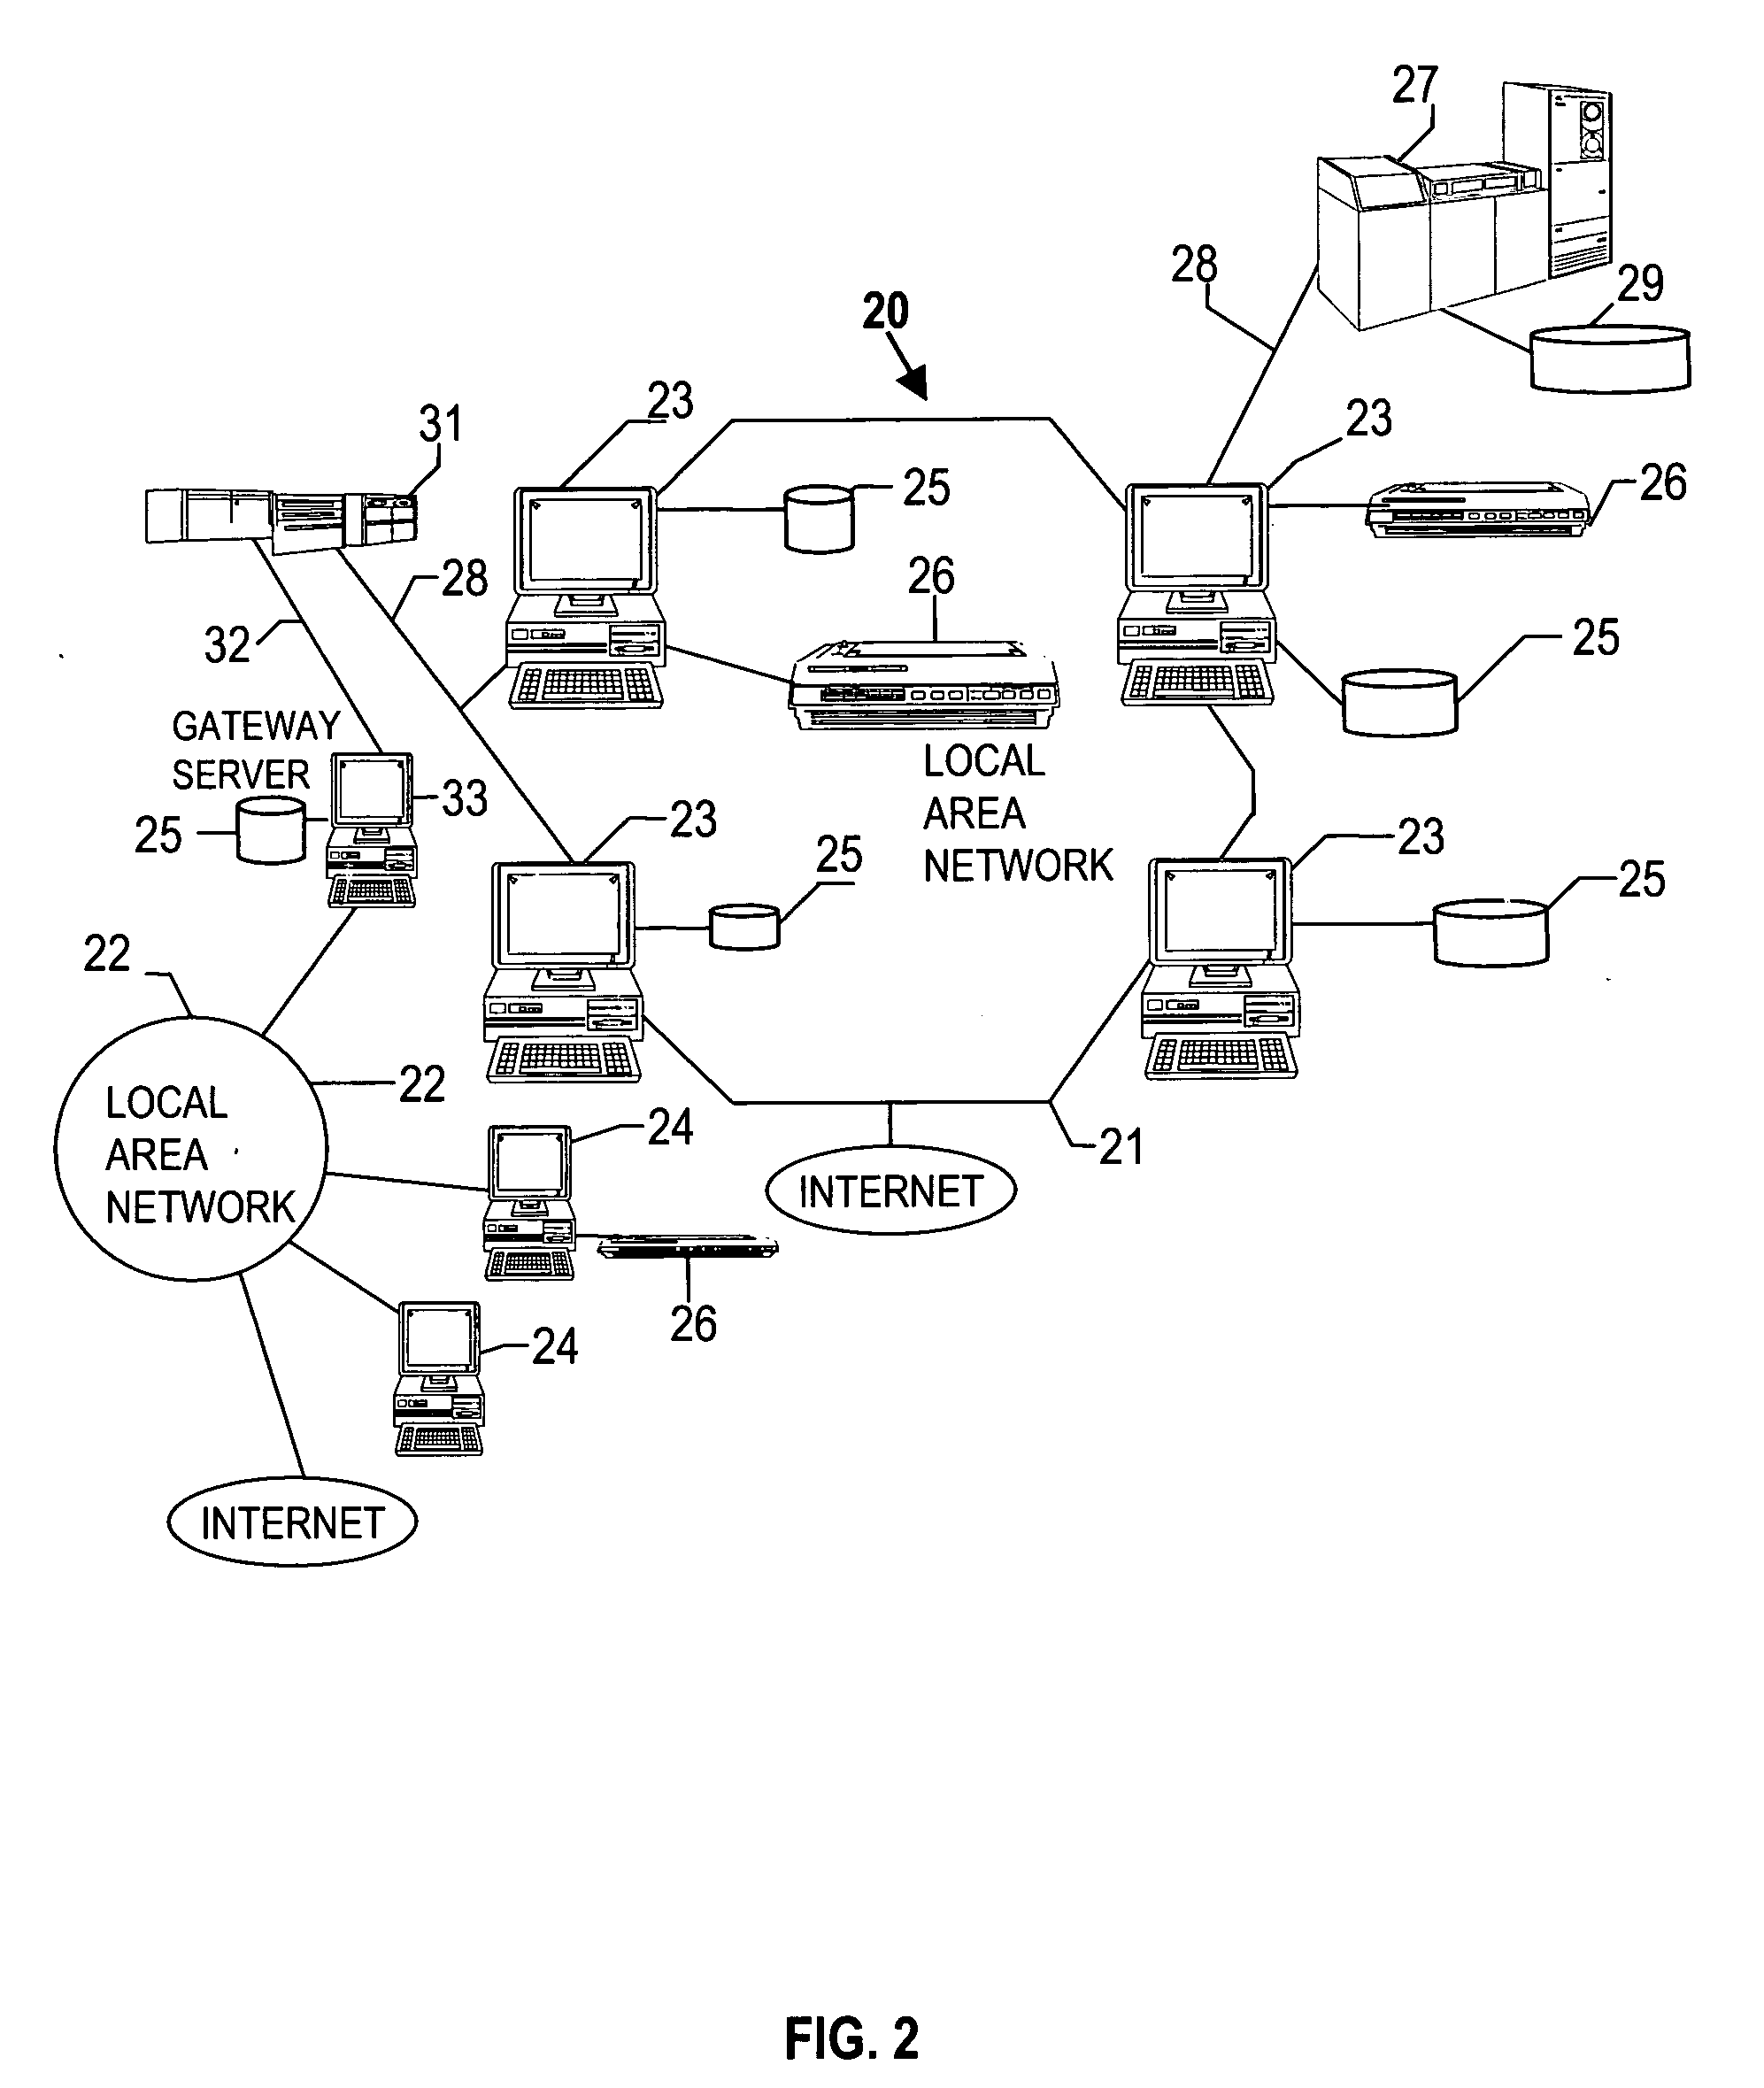 Seamless integrated multiple wireless data connections